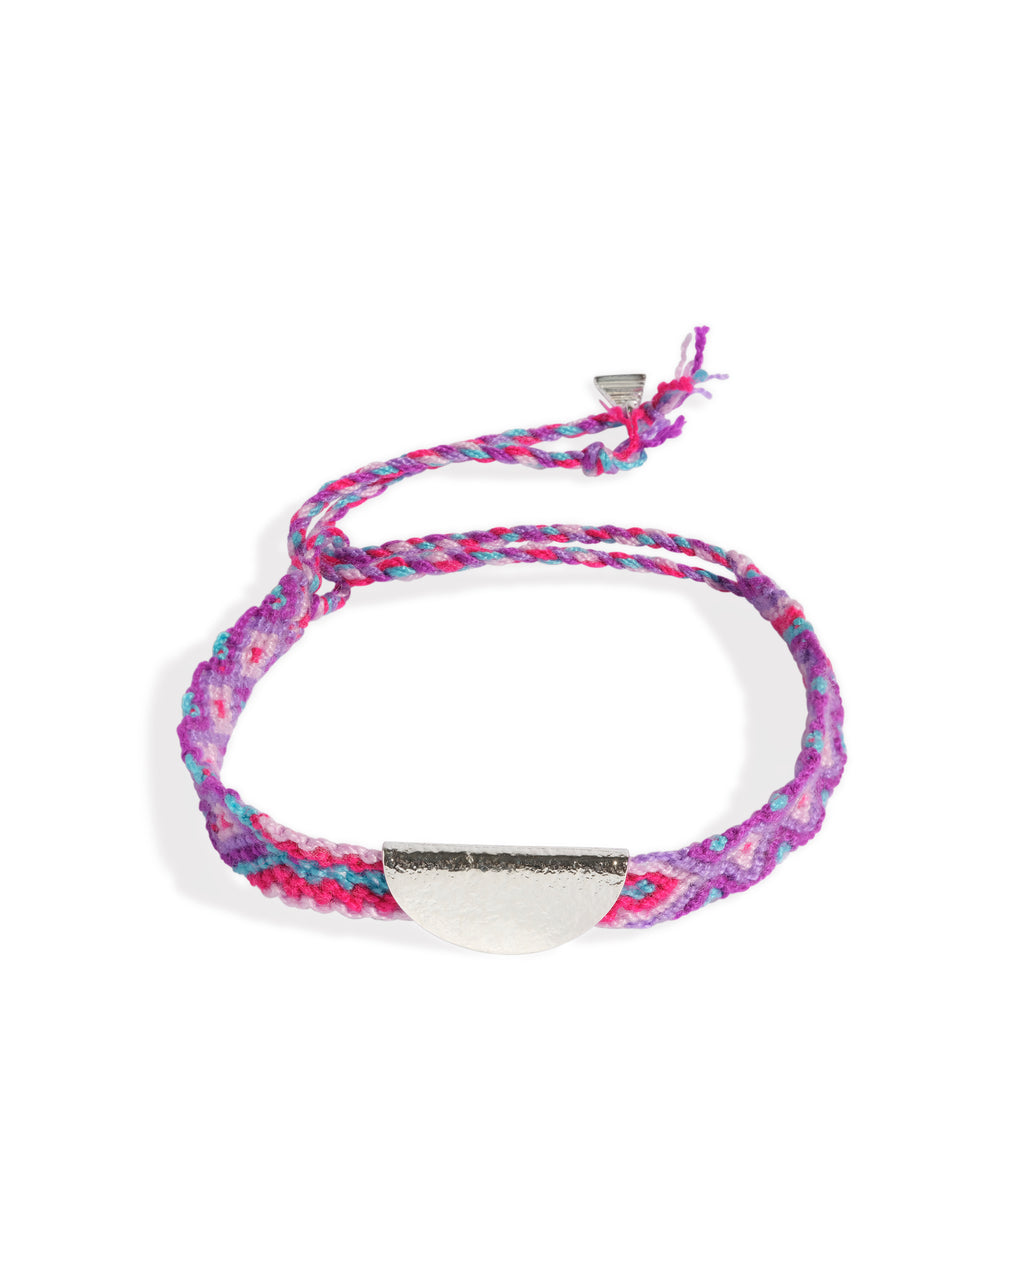 Friendship Bands | Lucy Folk Jewellery and Accessories | Lucy Folk